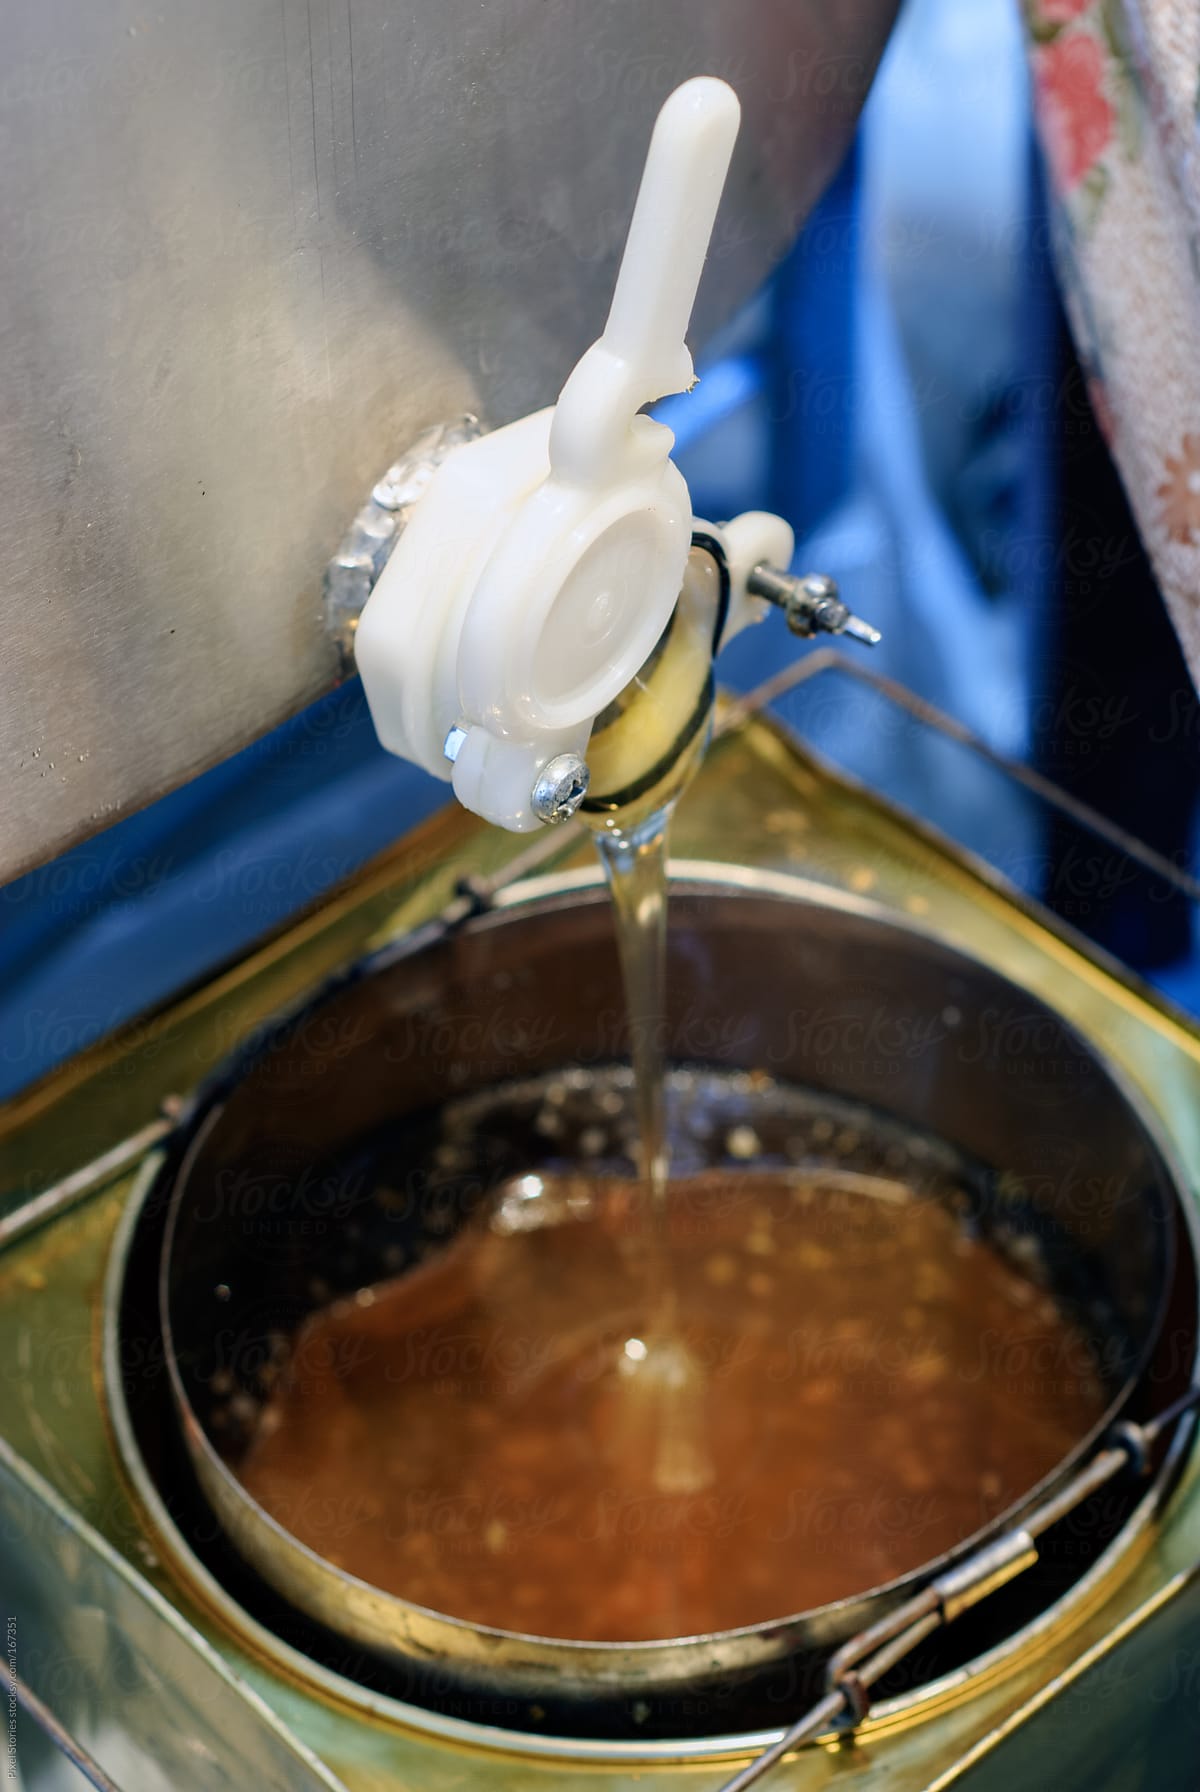 Honey extractor with honey flowing out of it